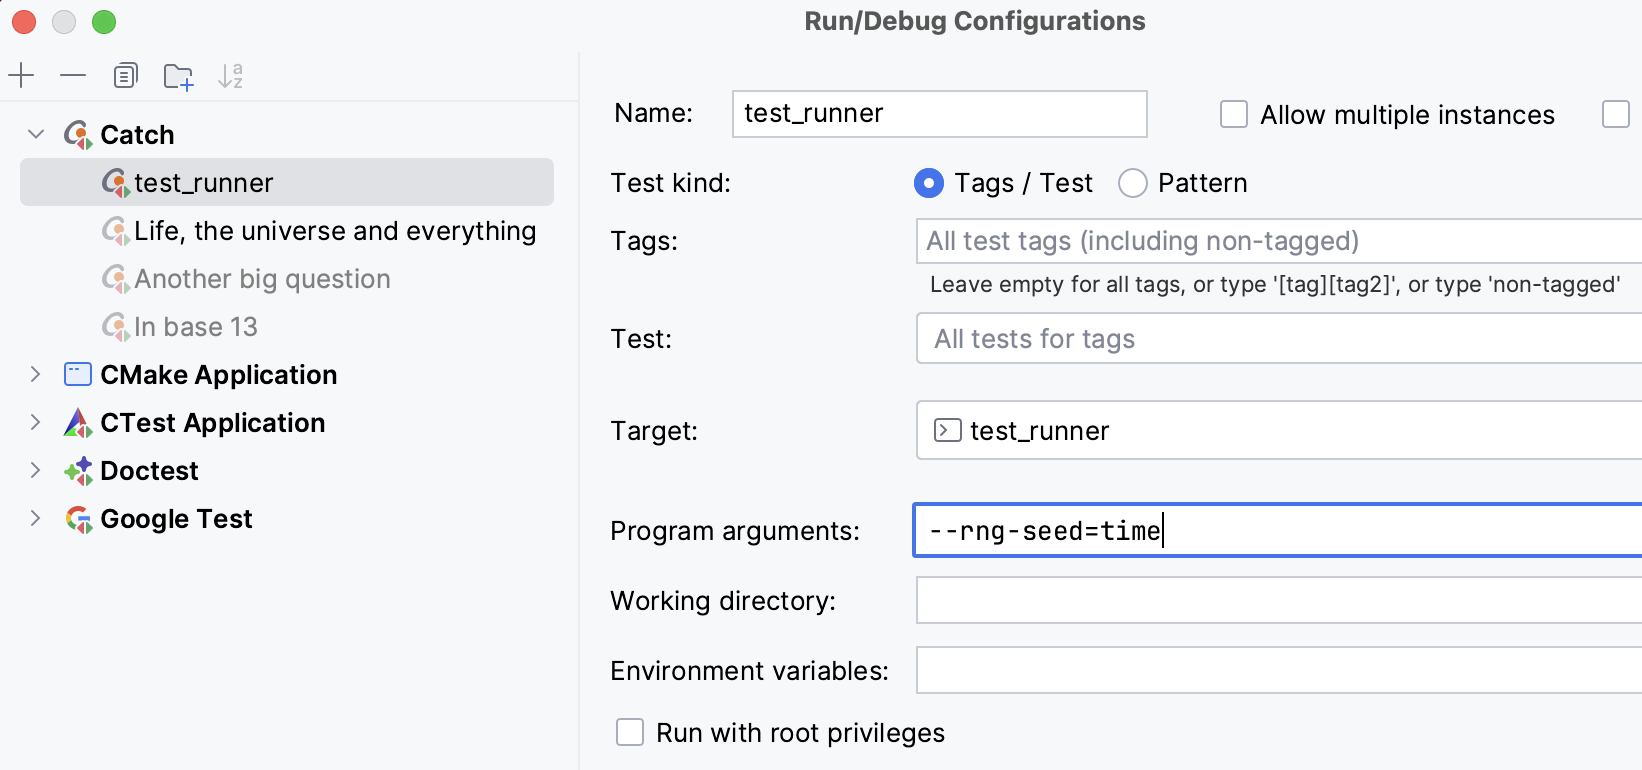 Specifying the rng-seed